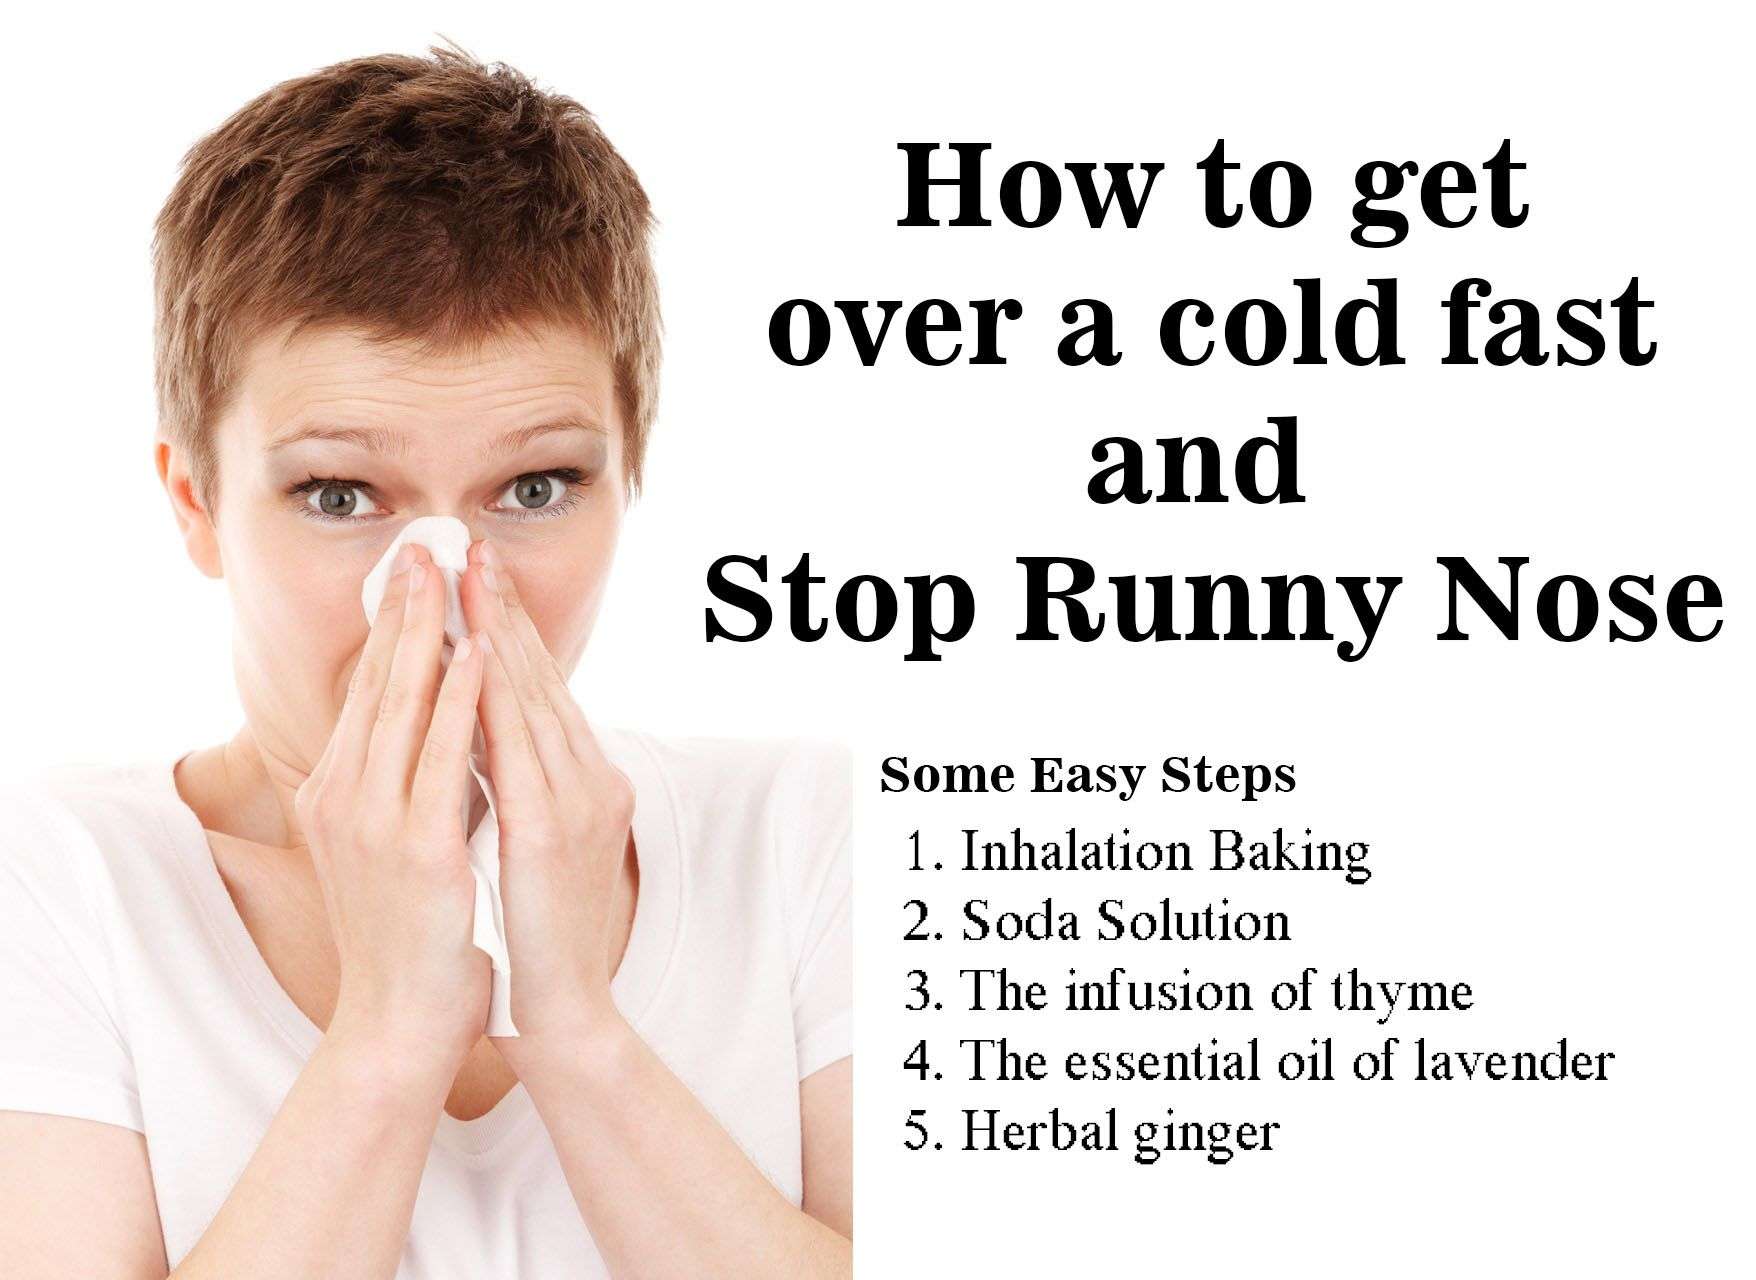 How to Get Over a Cold Fast